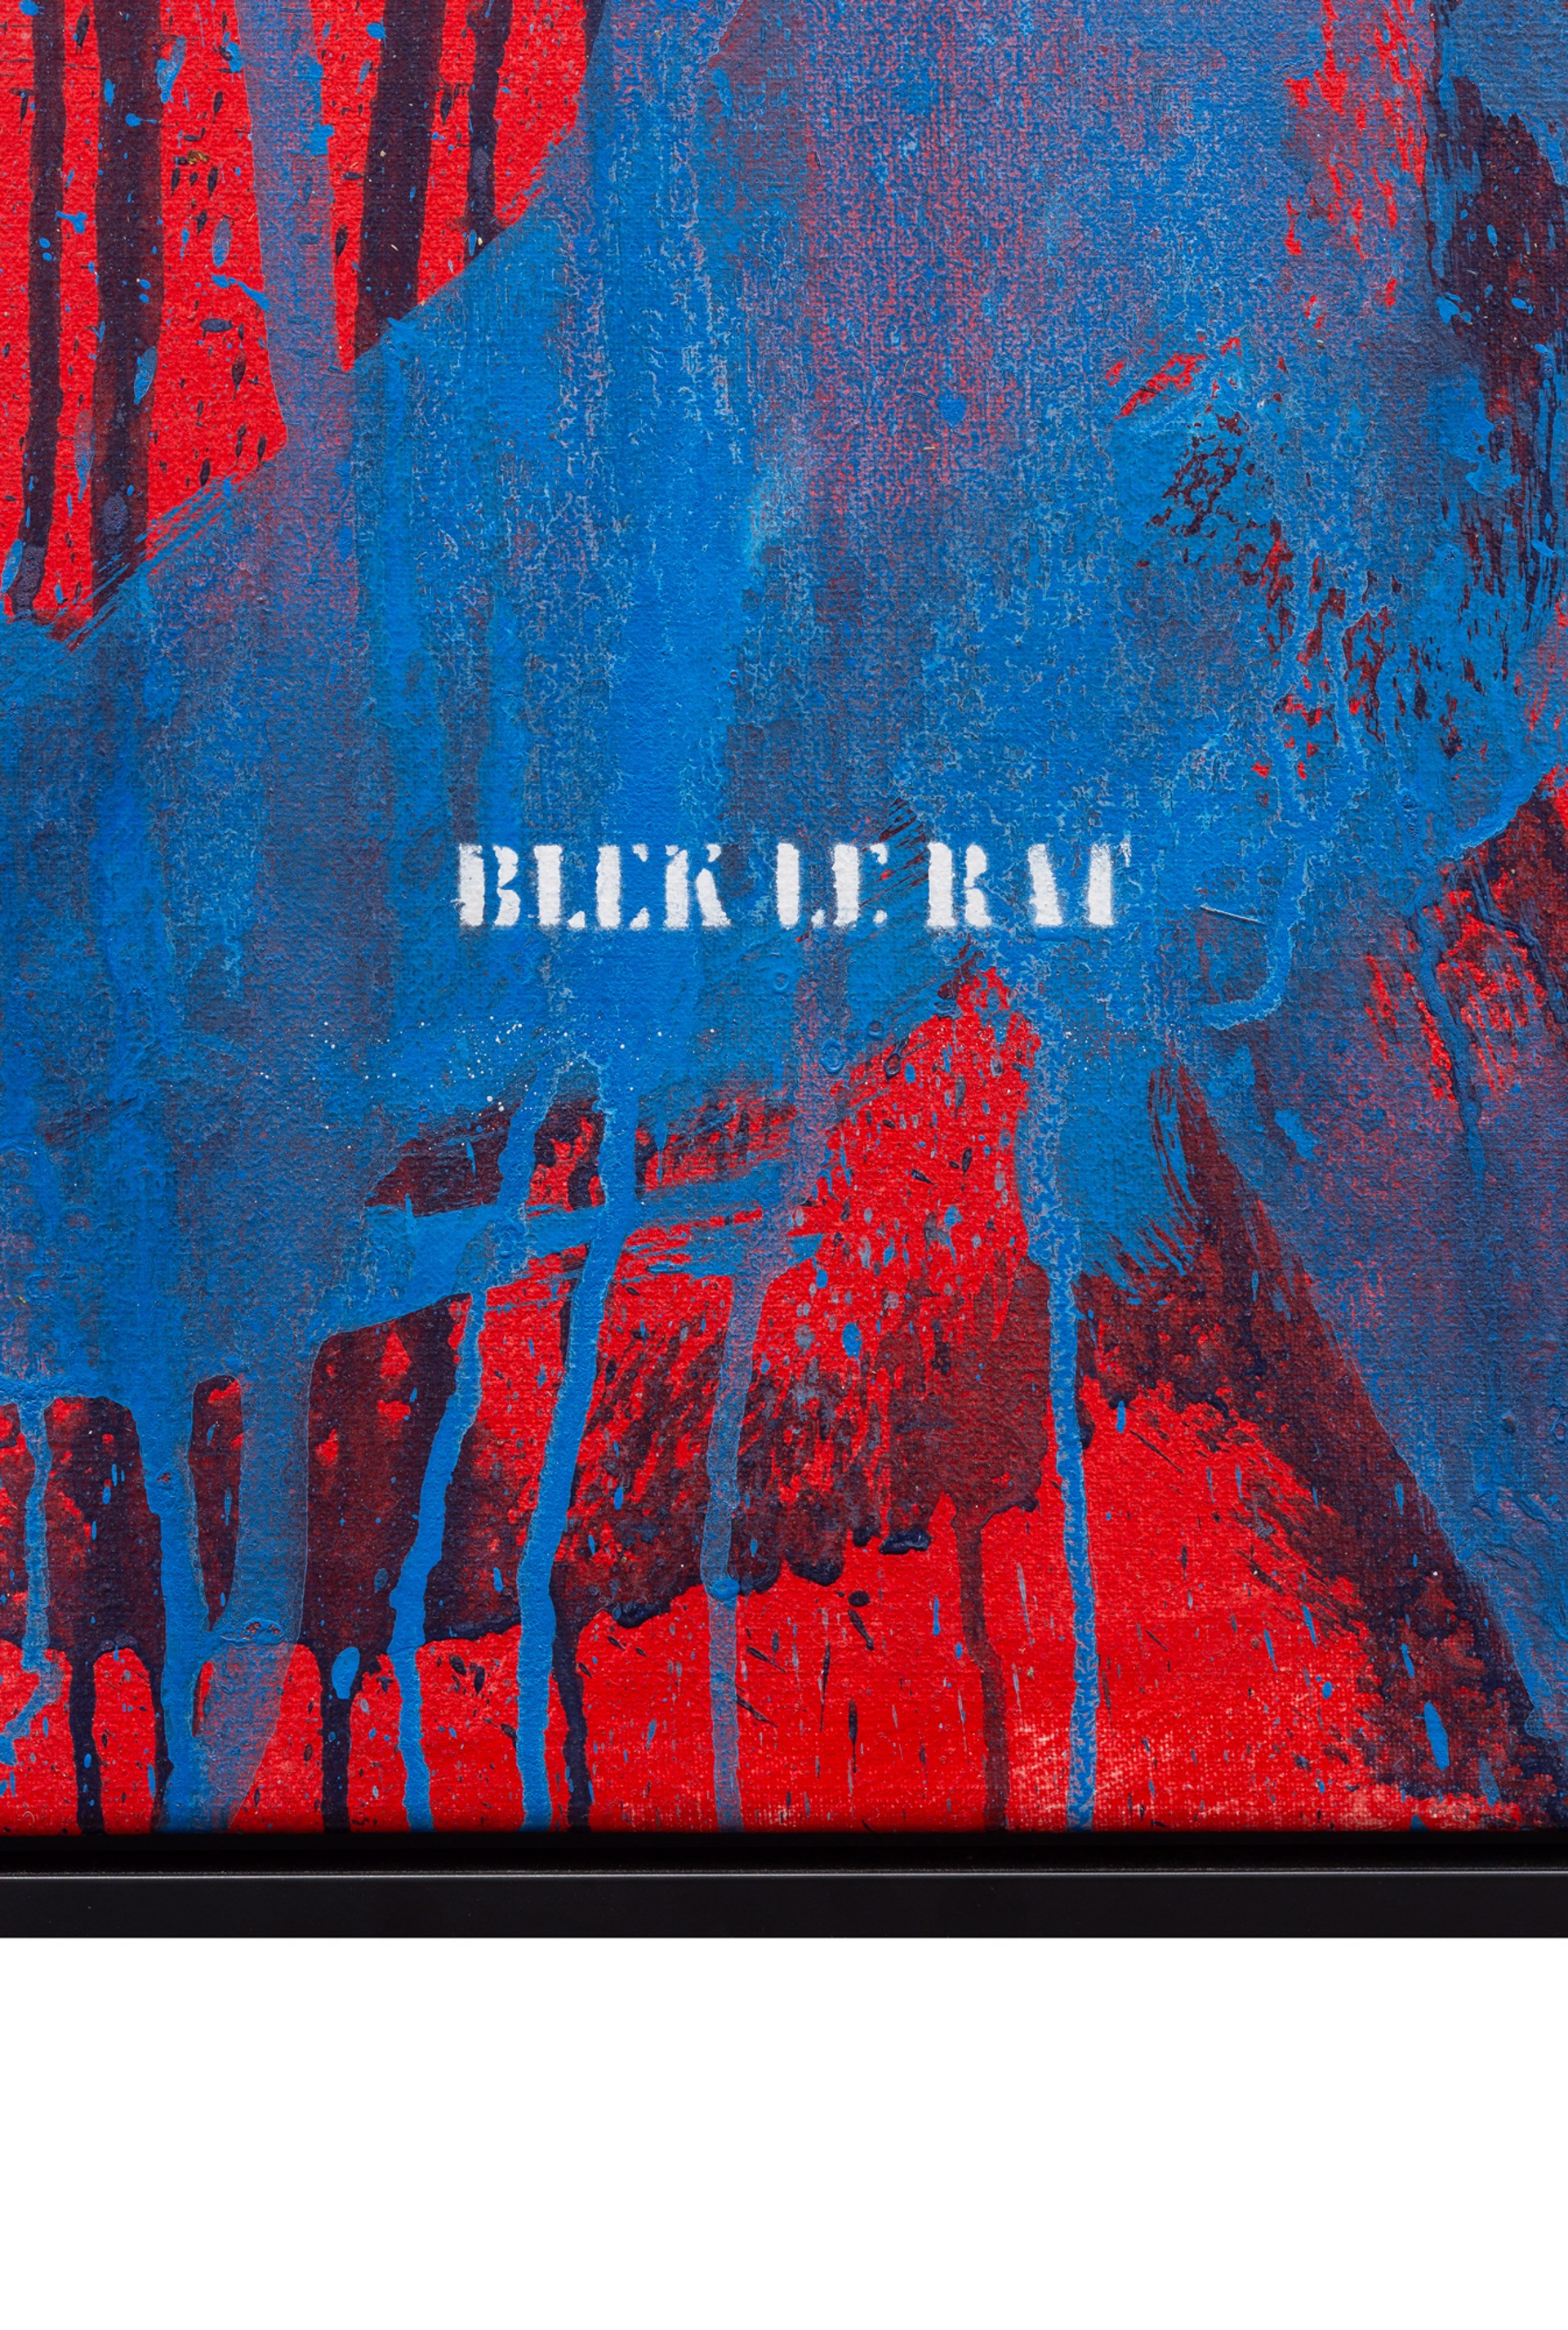 Music to Live 1 by Blek le Rat